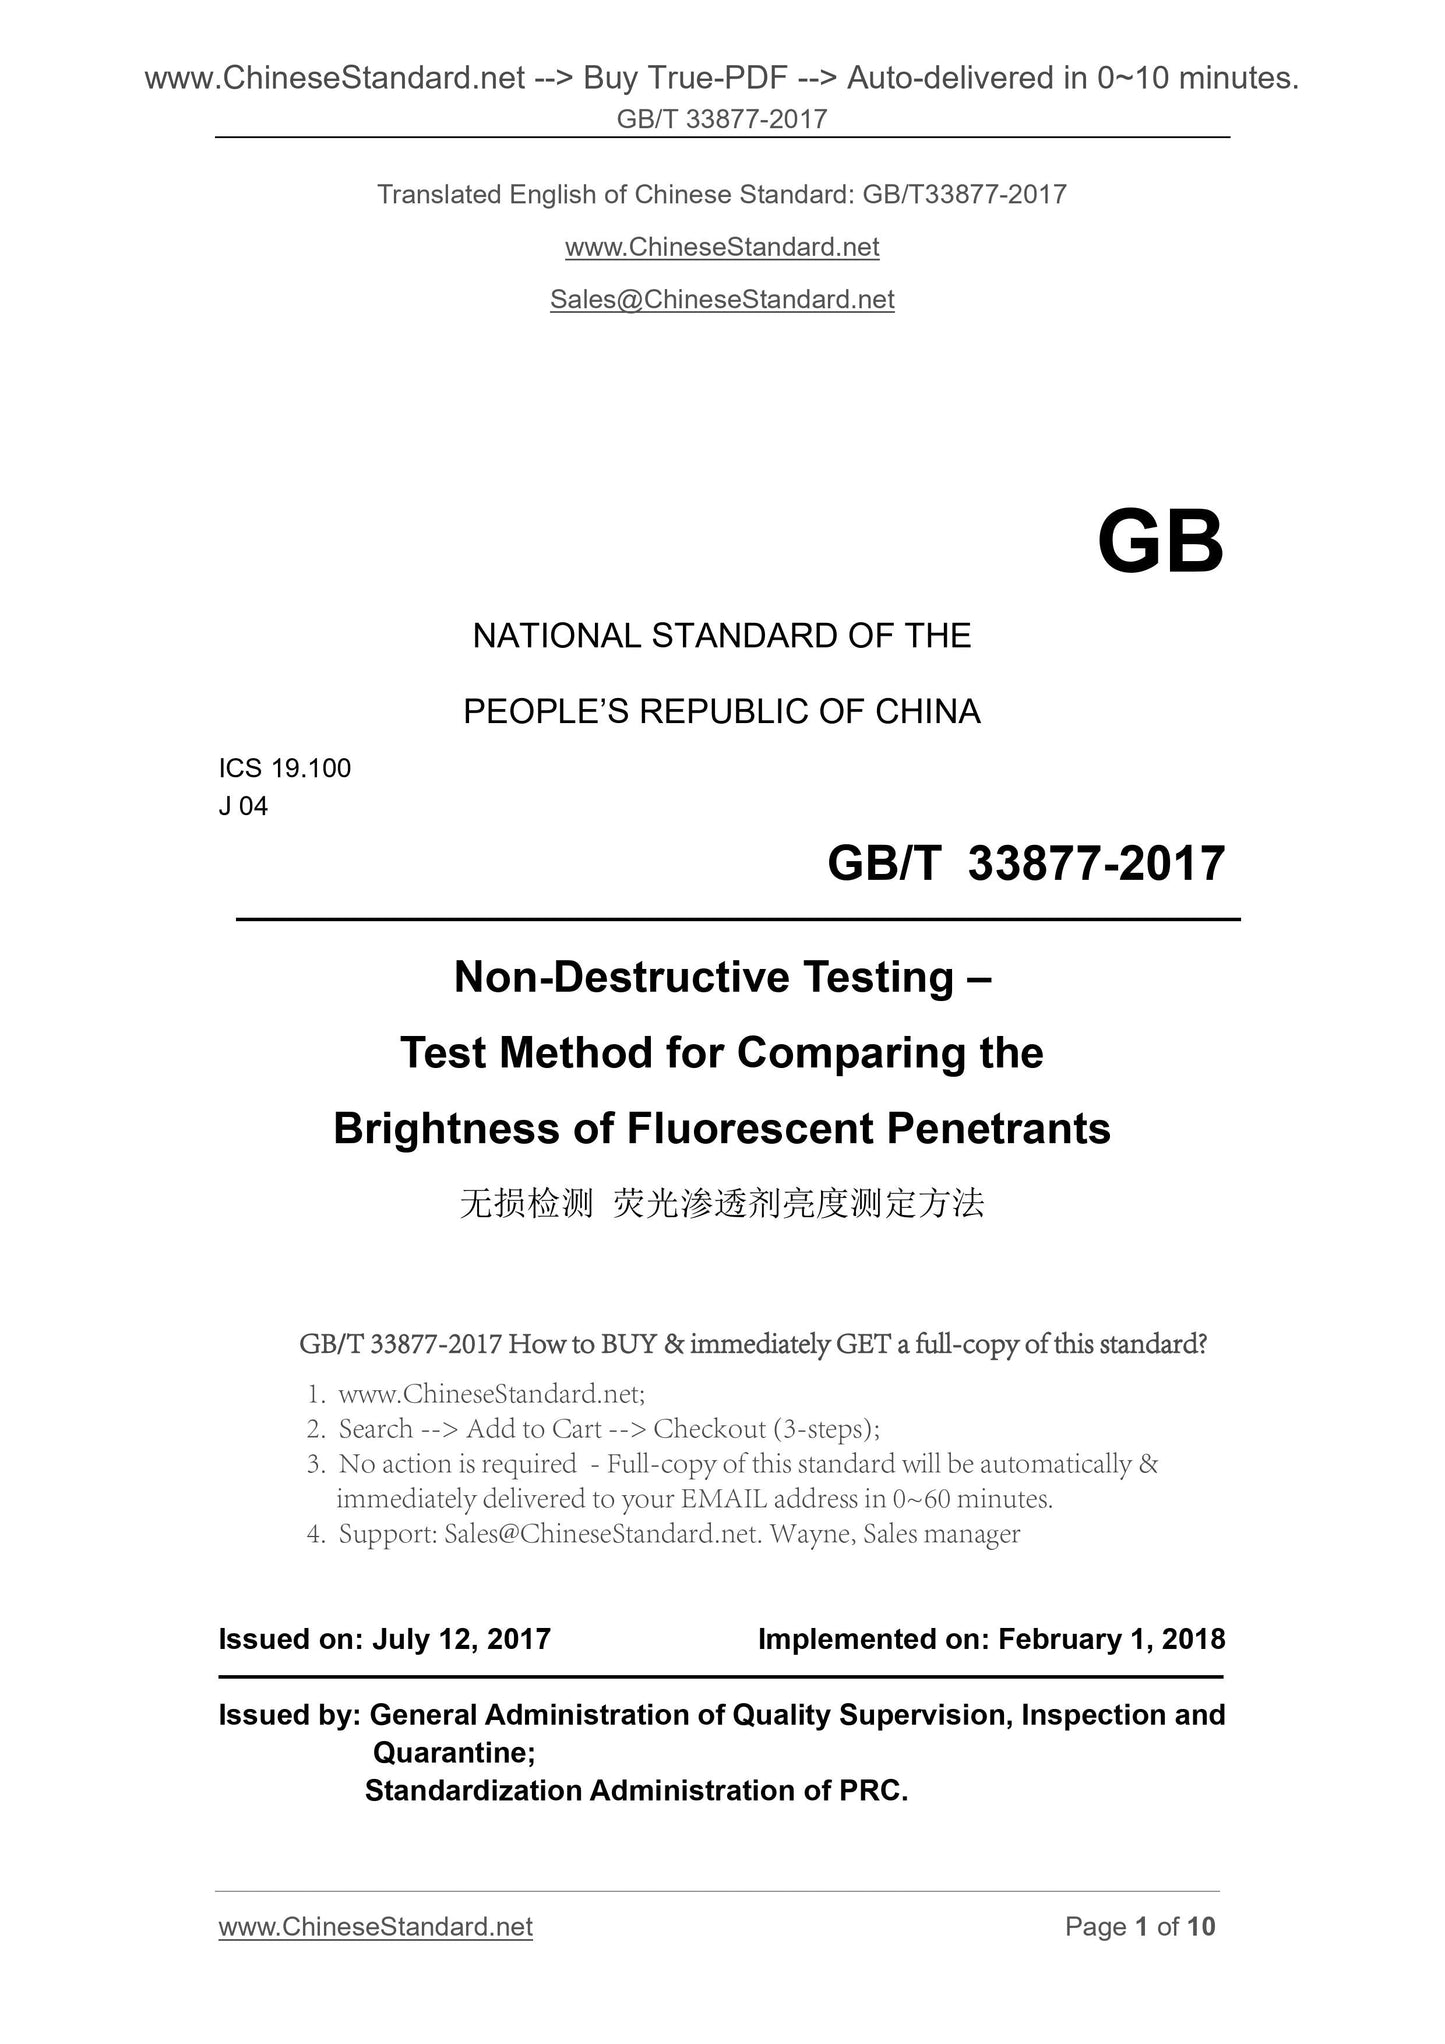 GB/T 33877-2017 Page 1